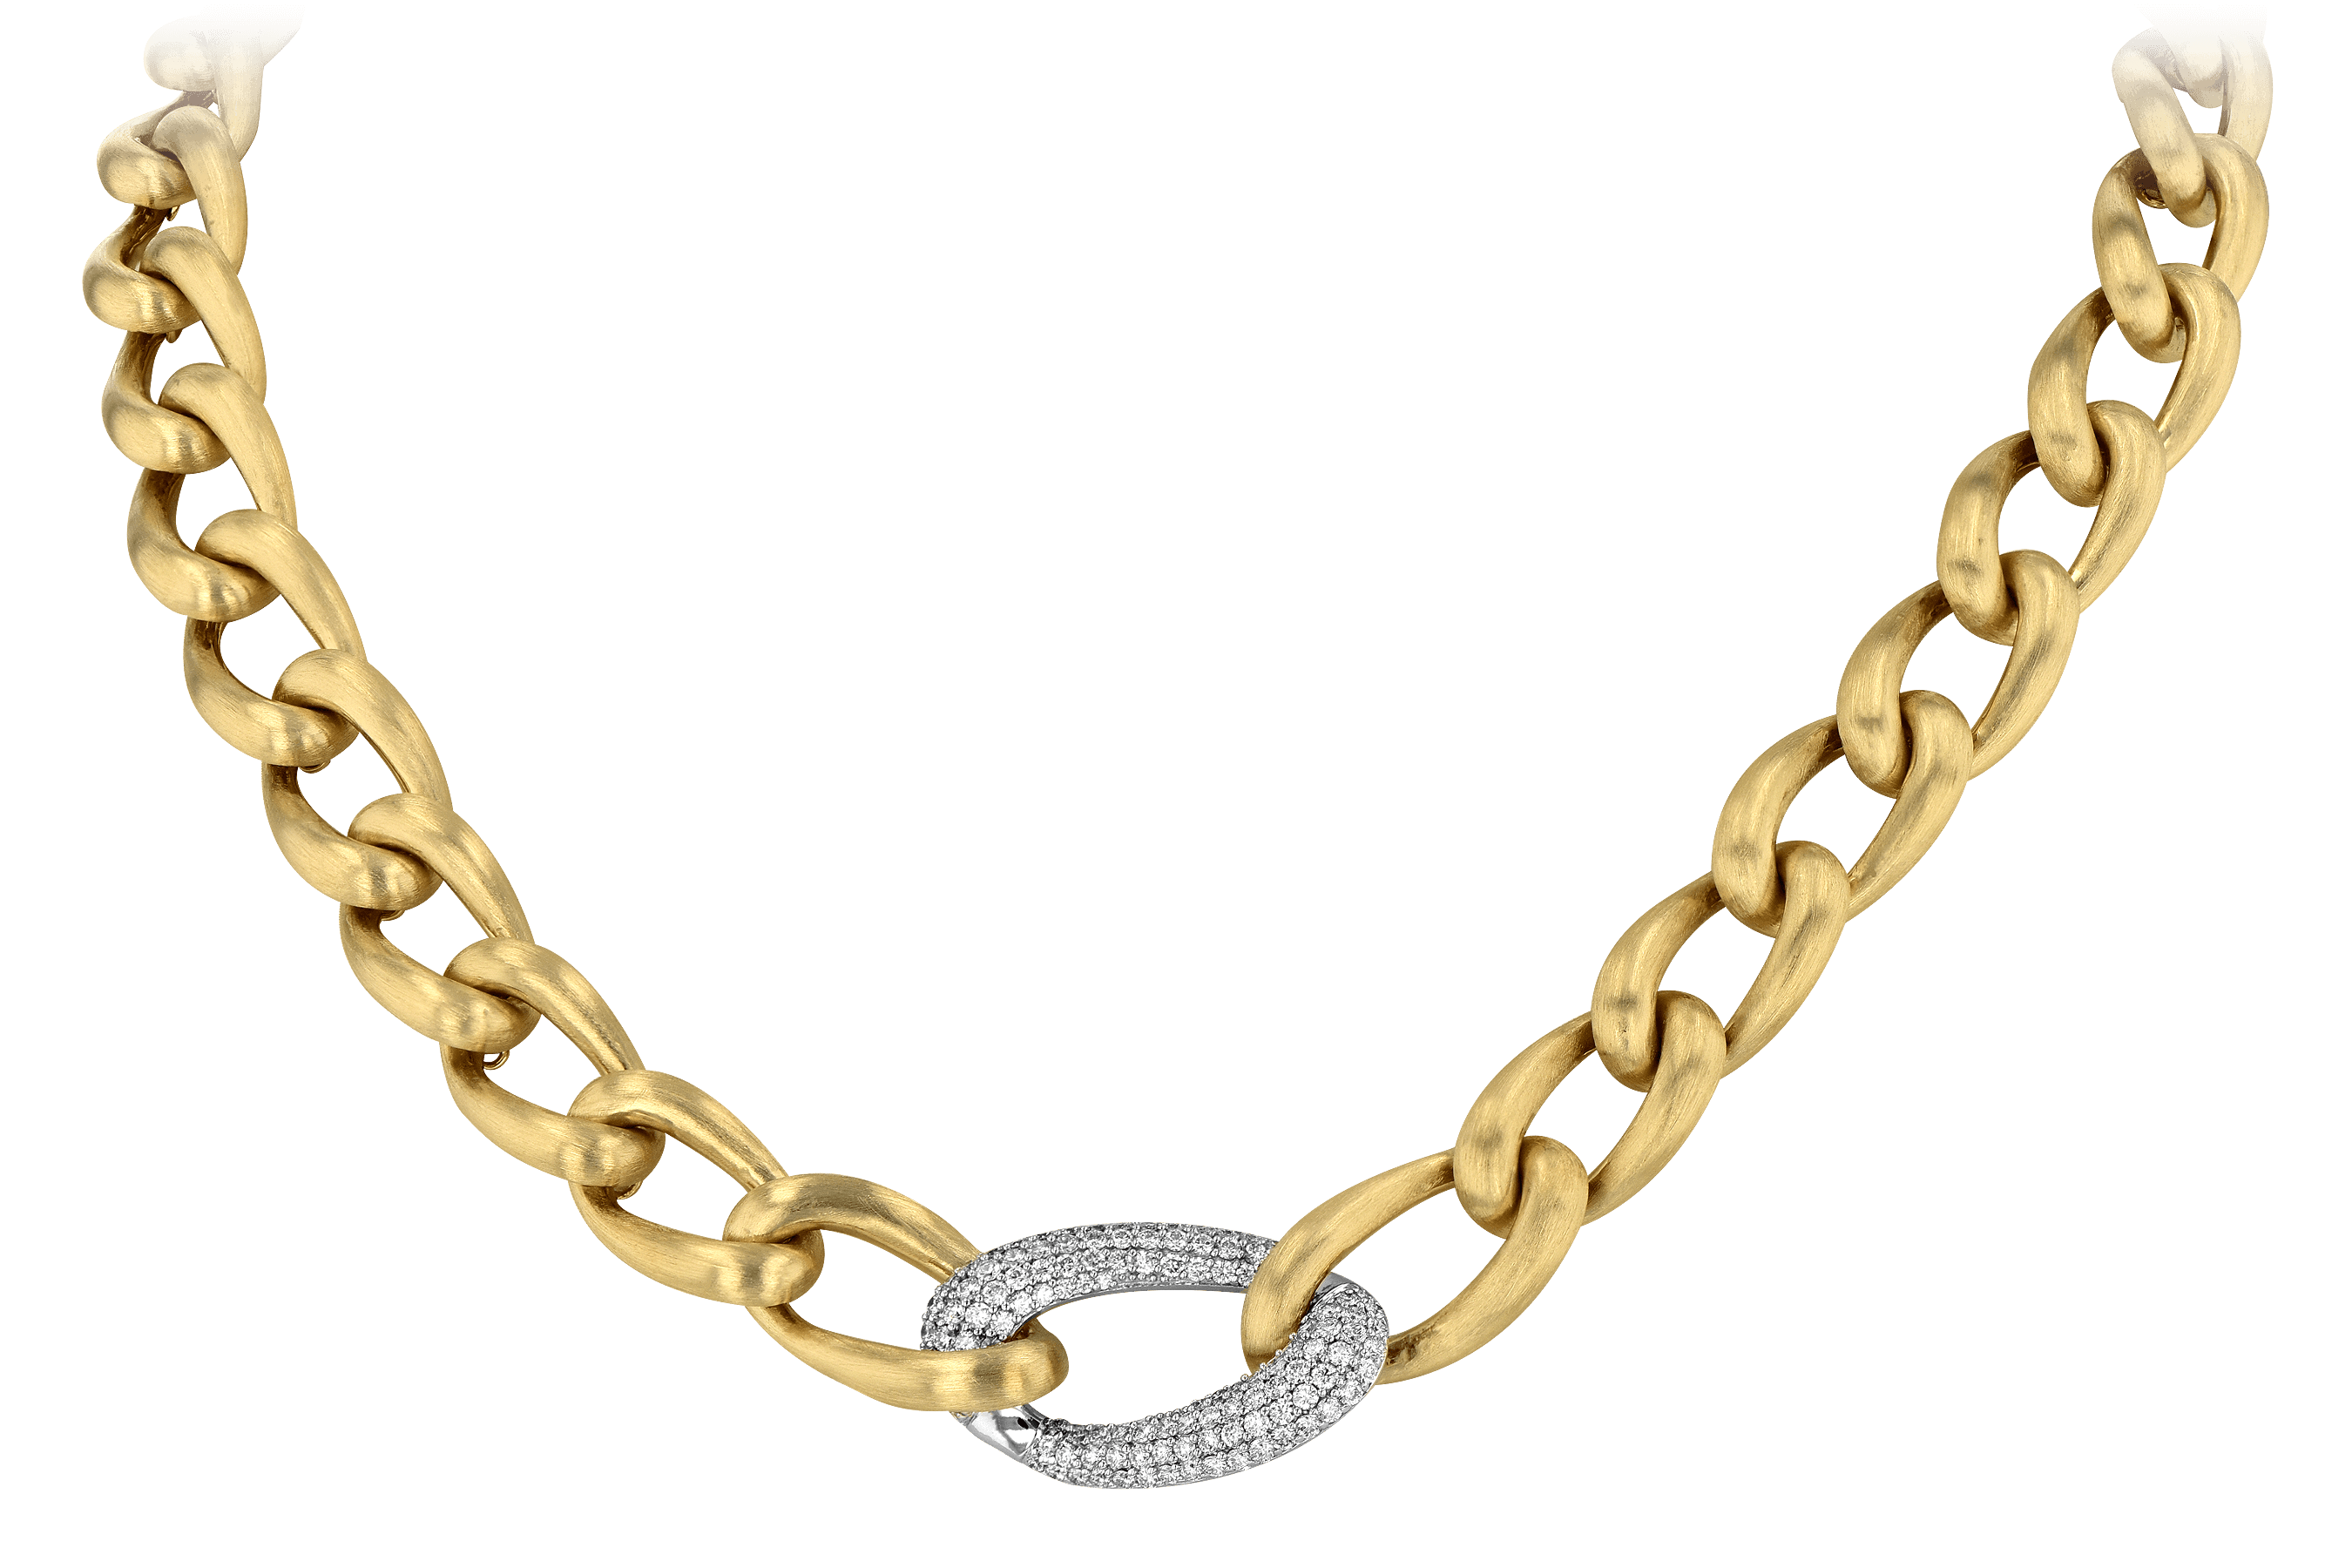 A199-28843: NECKLACE 1.22 TW (17 INCH LENGTH)